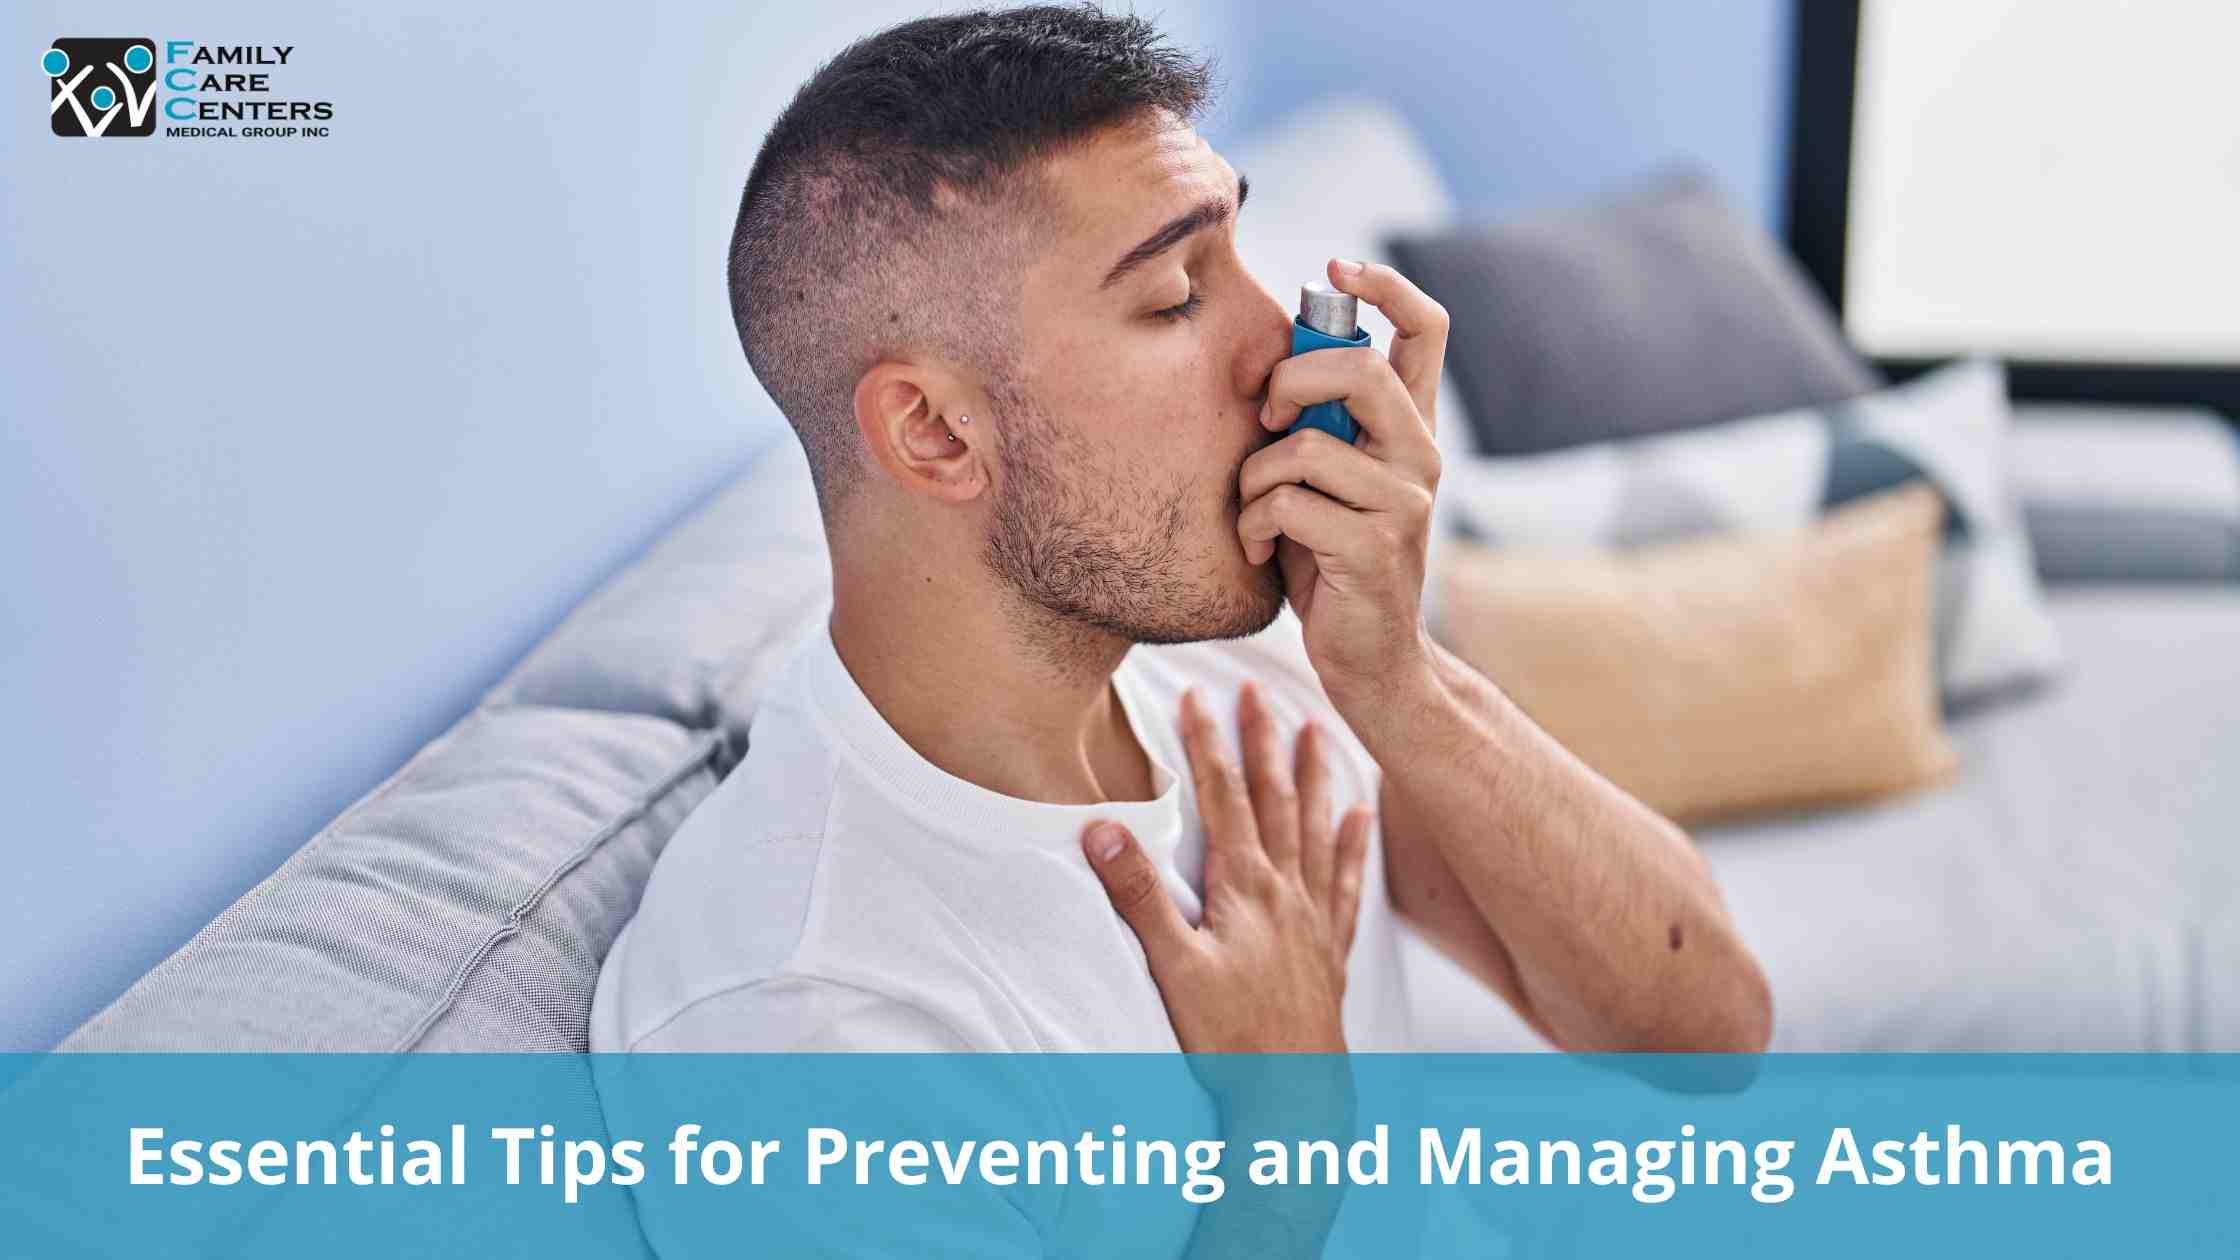 Essential Tips for Preventing and Managing Asthma